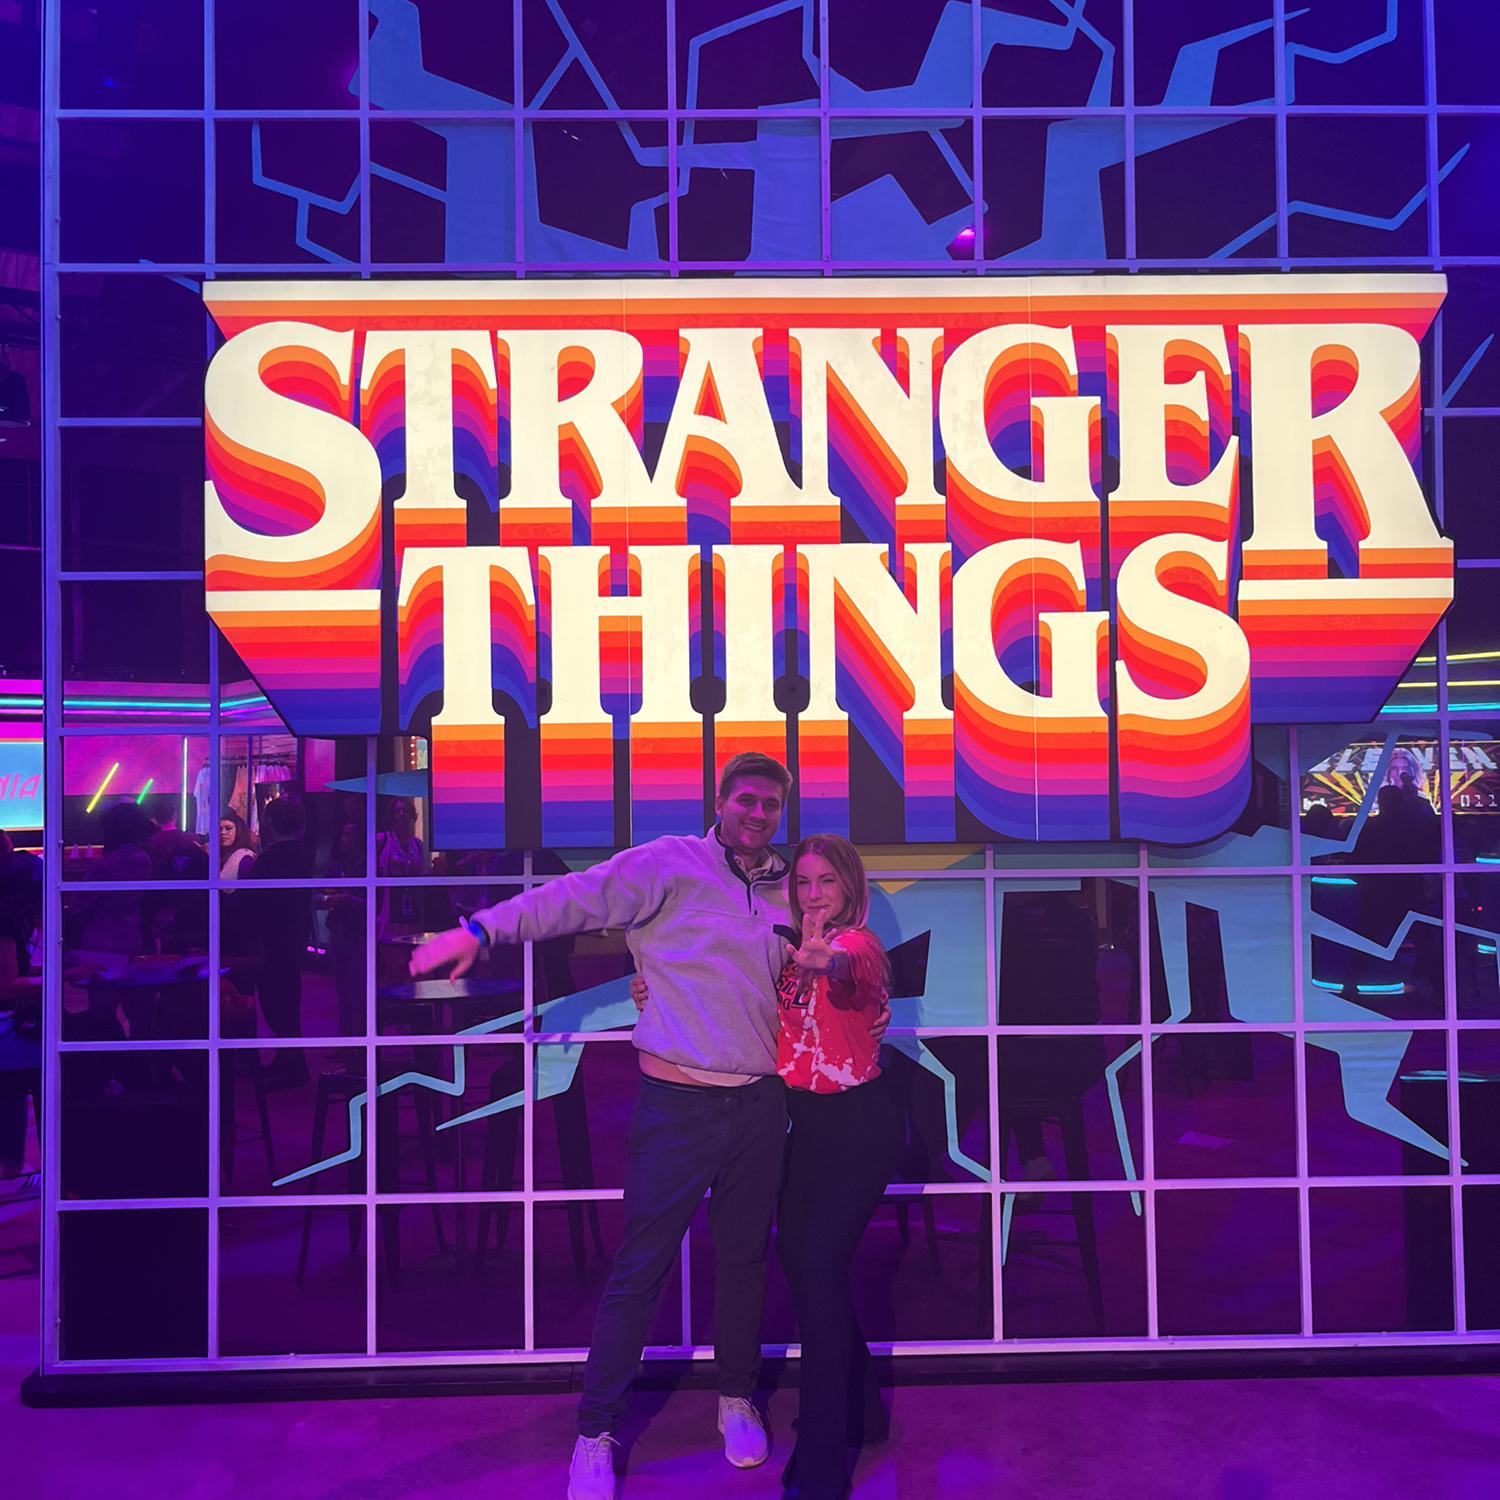 Stranger Things experience downtown Atlanta before our Stranger Things themed Halloween party.